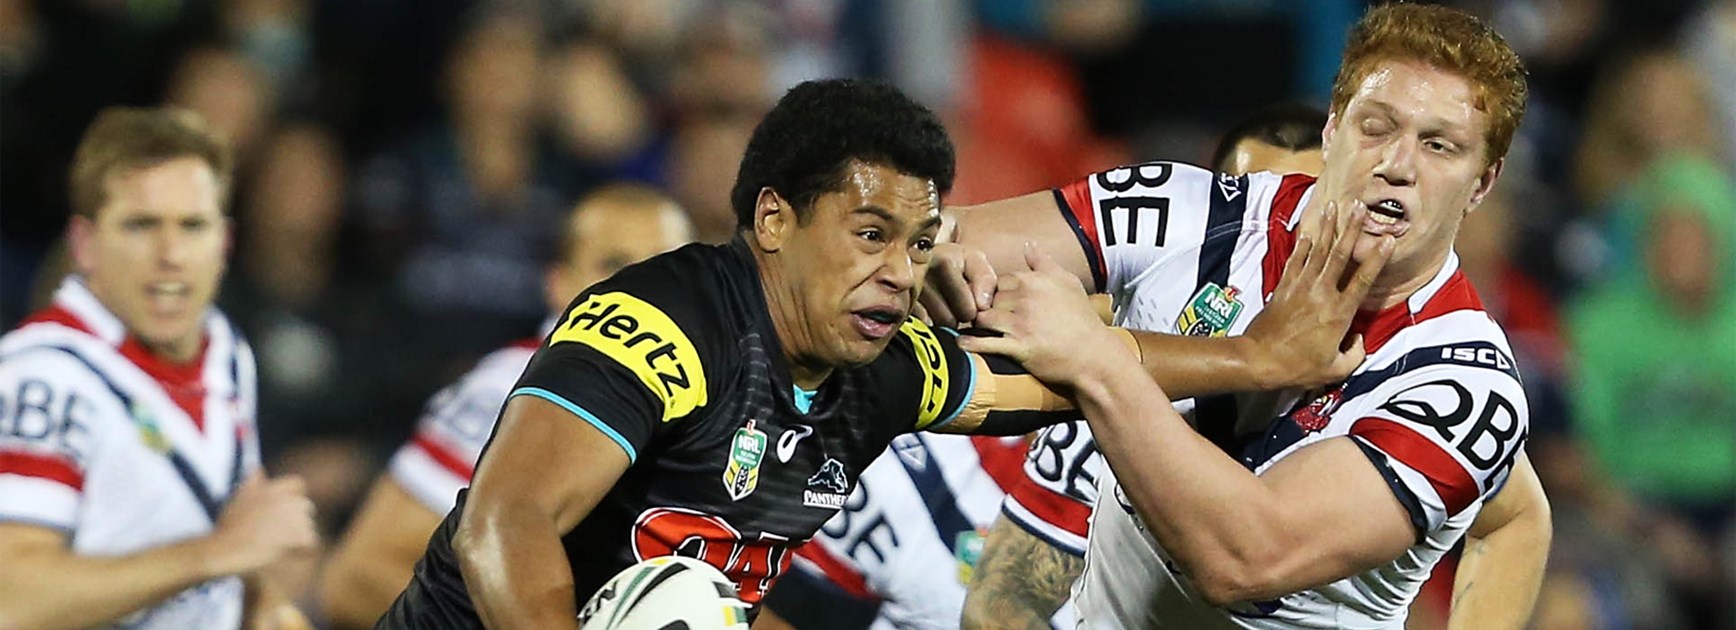 Waqa Blake brushes out of a Dylan Napa tackle during the Panthers' clash with the Roosters on Saturday.